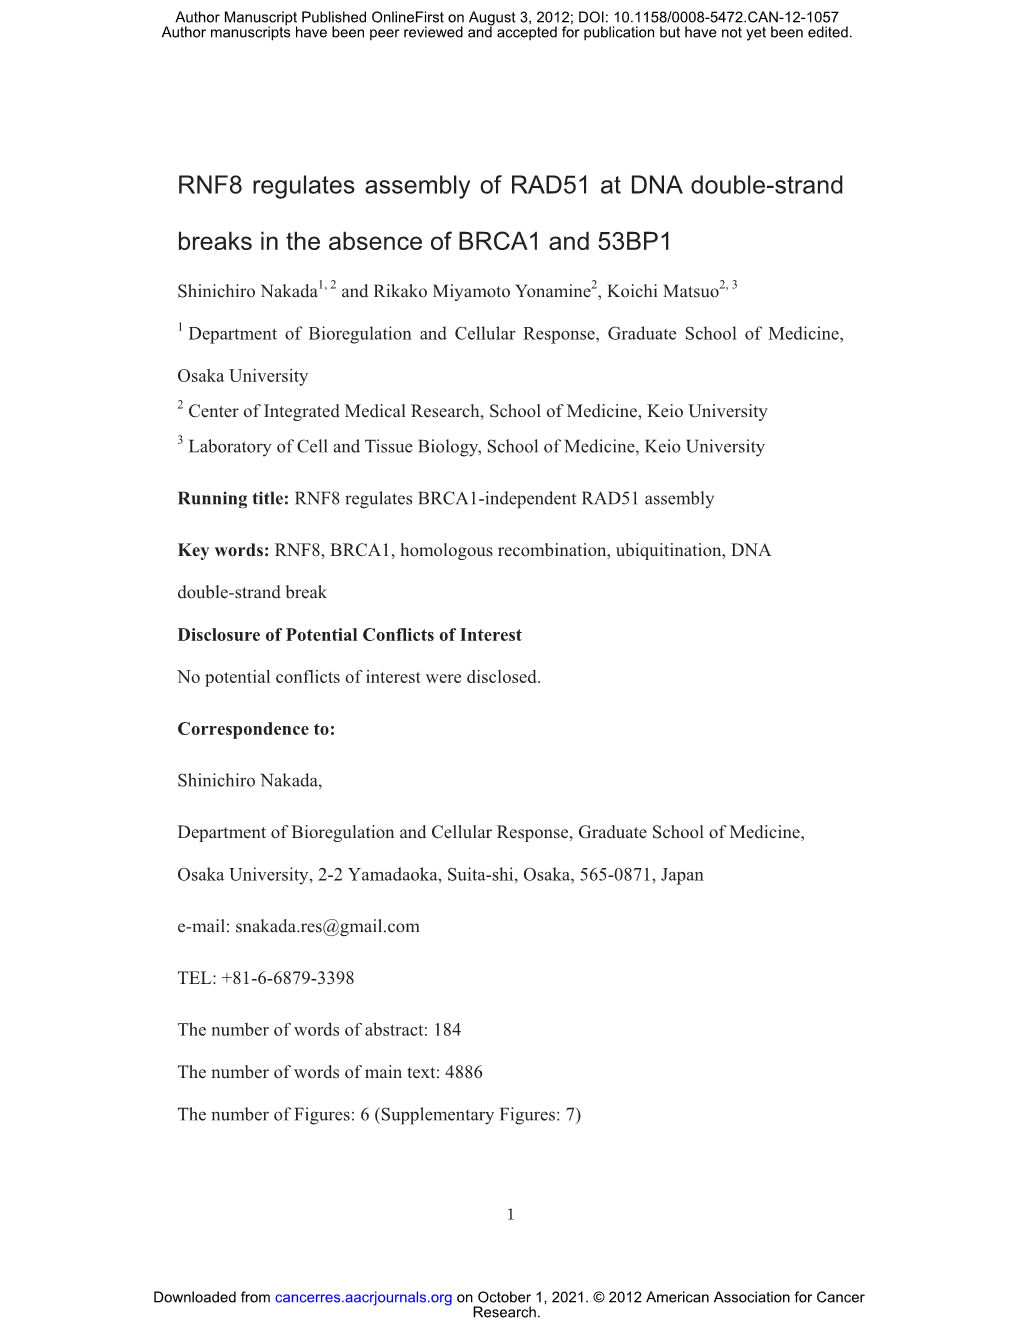 RNF8 Regulates Assembly of RAD51 at DNA Double-Strand Breaks in the Absence of BRCA1 and 53BP1